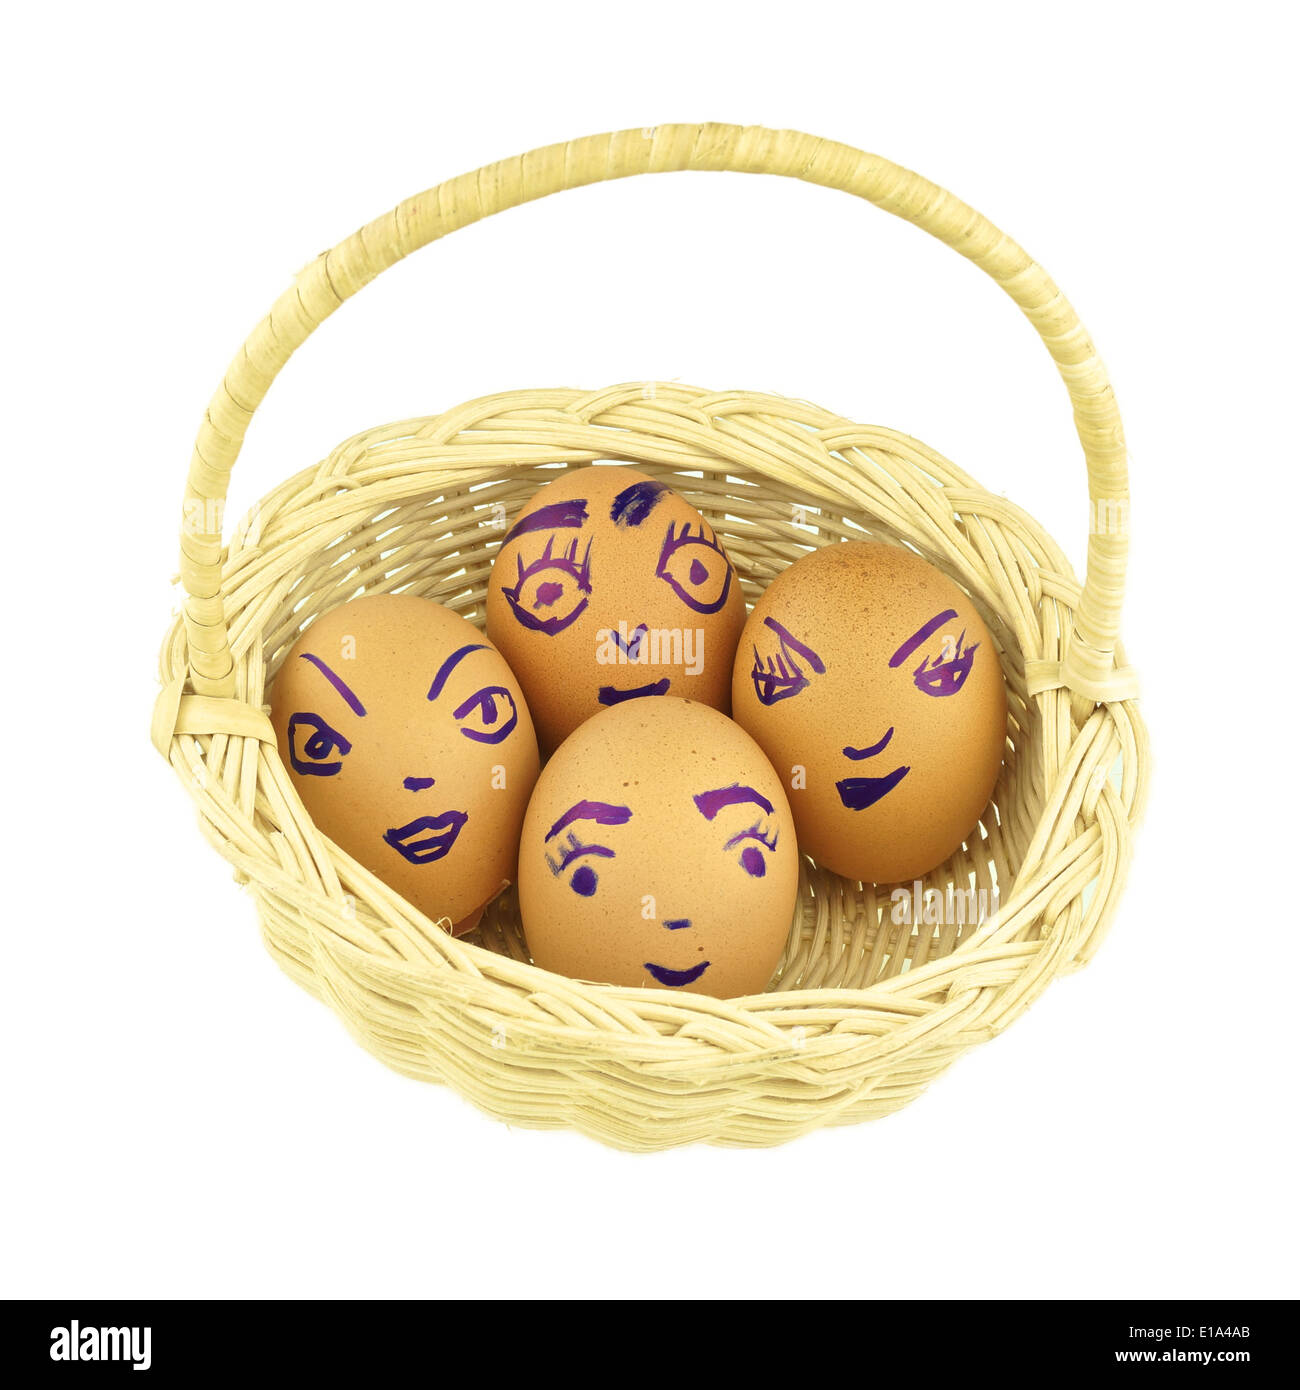 Happy and fun emoticons on empty eggshell in basket isolated with white background. Stock Photo